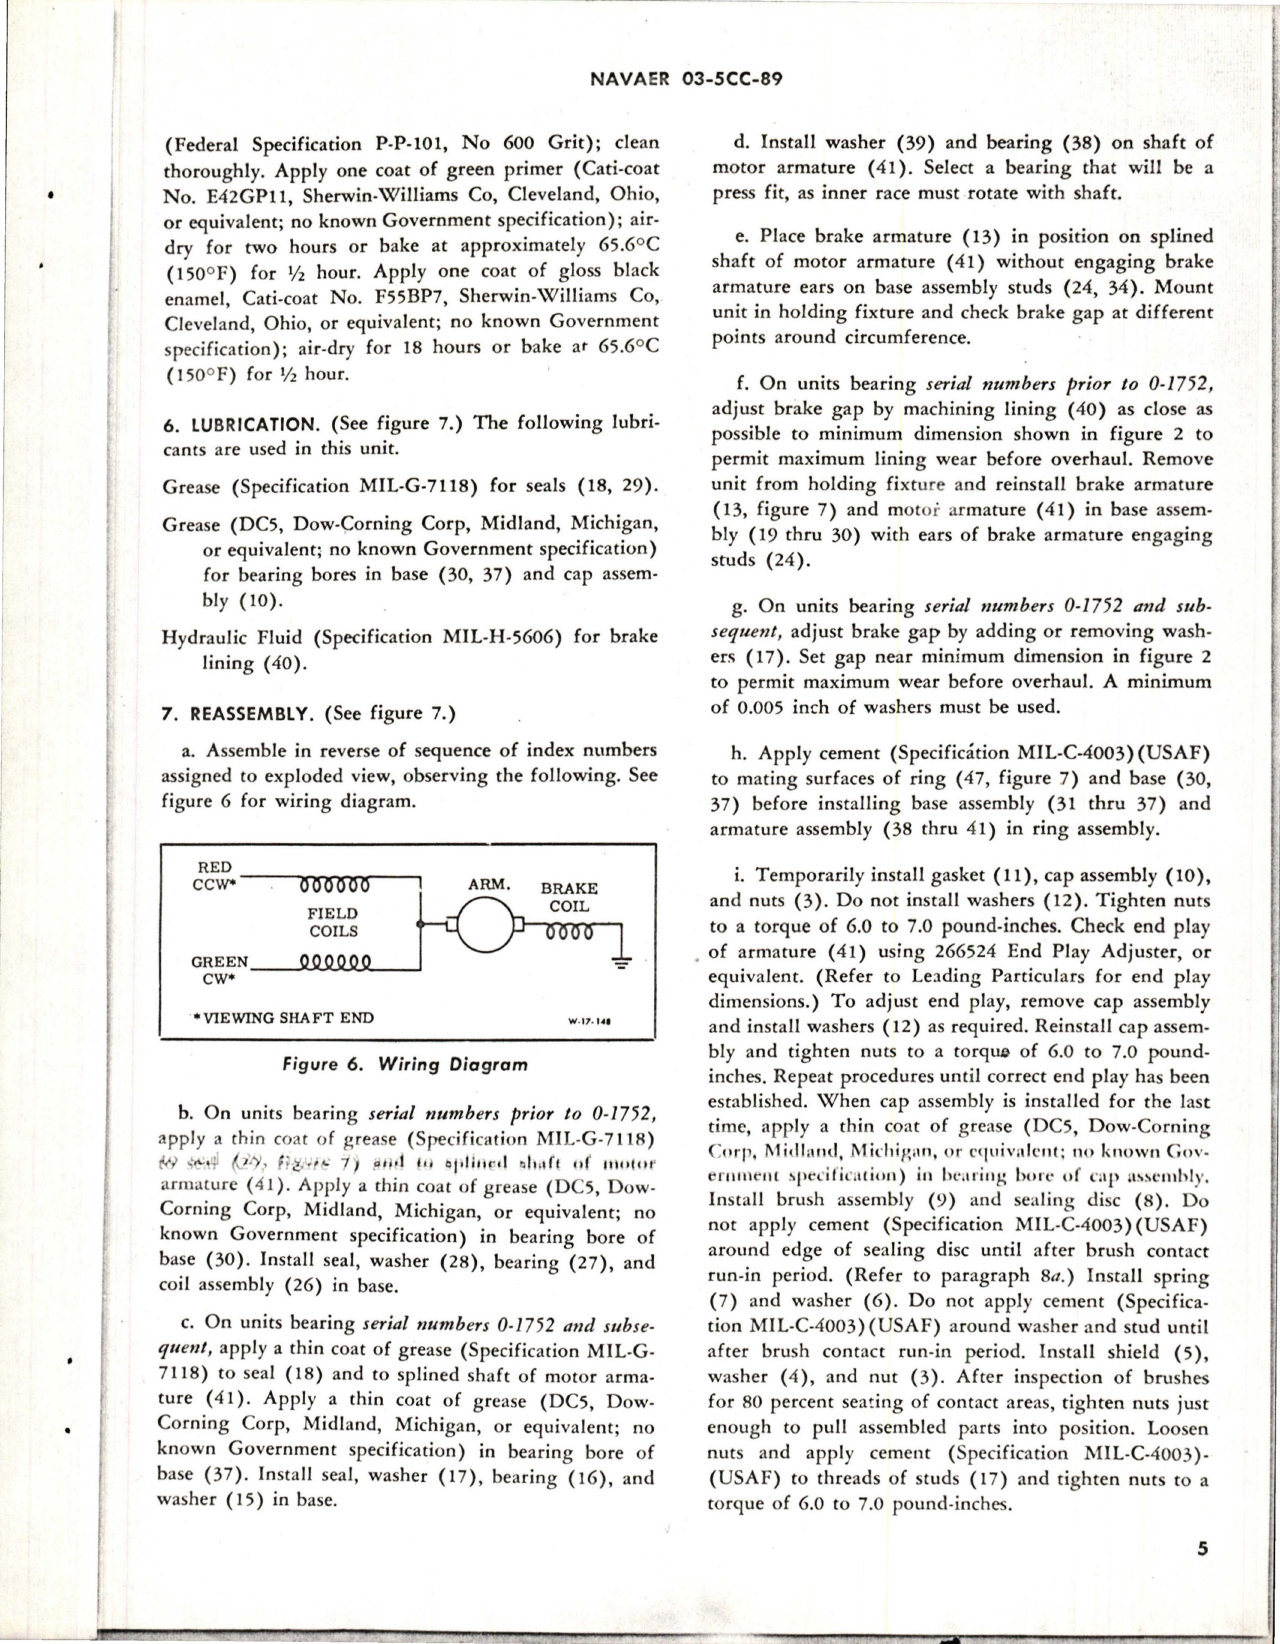 Sample page 5 from AirCorps Library document: Overhaul Instructions with Parts Breakdown for HP Direct Current Pinion Shaft Motor 0.04 - Part 26675 - Model DCM15-4